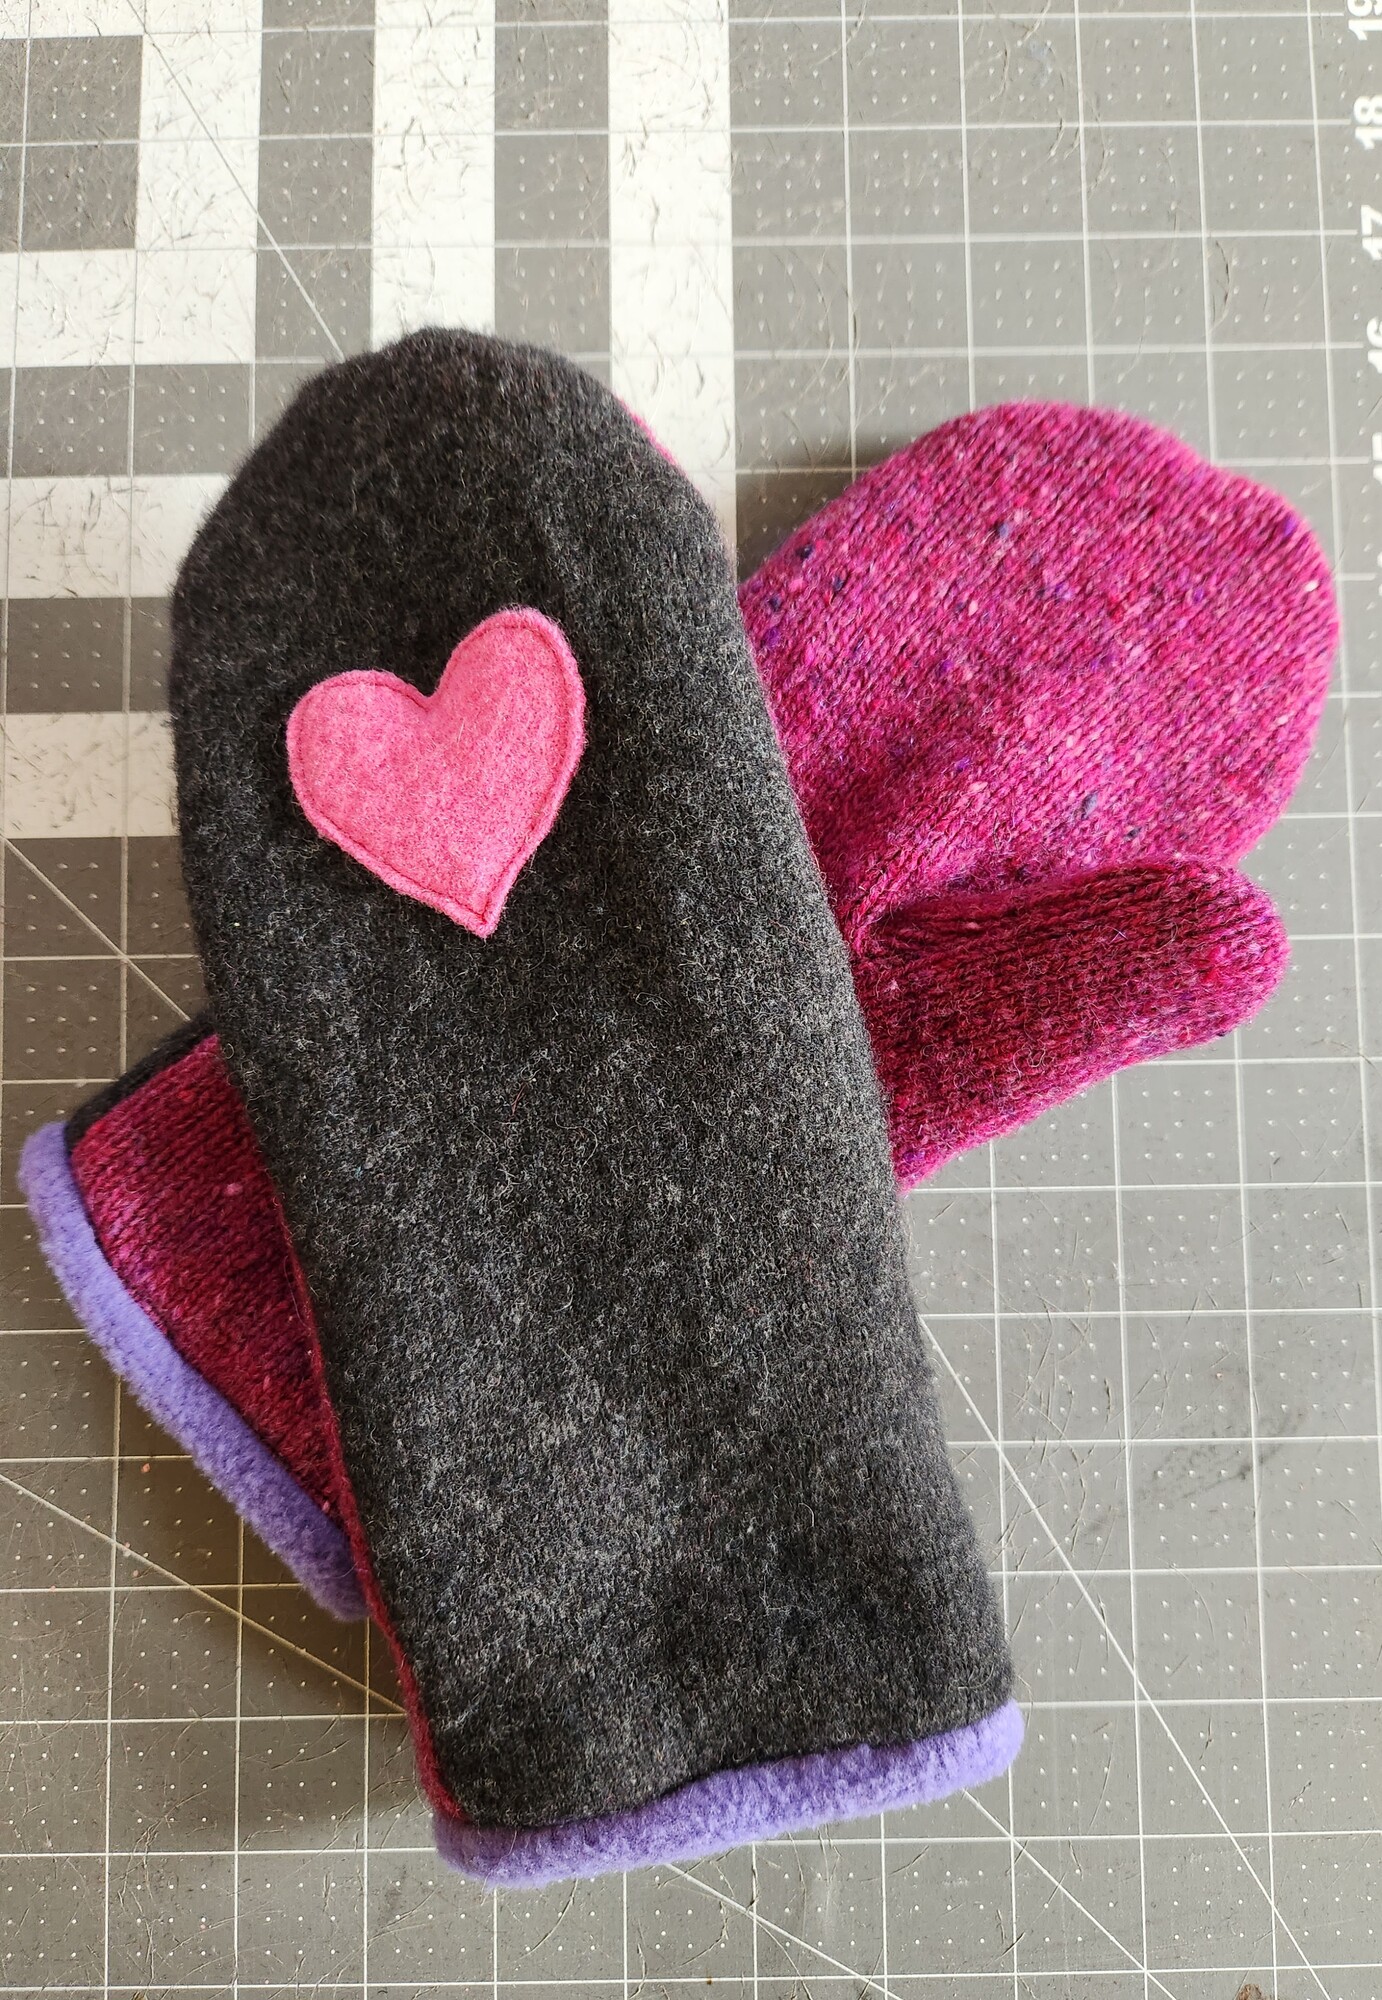 RECYCLED MITTENS, HEARTS, Size: Large
TWEED RIVER FARM MITTENS
MADE IN VERMONT FROM RECYCLED WOOL AND CASHMERE SWEATERS, MINK & SEAL VINTAGE COATS.
SOMETIMES DESIGNER SCARVES OR EMBELLISHED WITH A DESIGNER NOTION. PATCHES ARE FROM GARMENT BAGS I HAVE DECONSTRUCTED.
LINED WITH A NEW NON-PILL FLEECE
ONE OF A KIND
I DO GUARANTEE MY WORK 100%
MADE BY ME
TWEED RIVER FARM